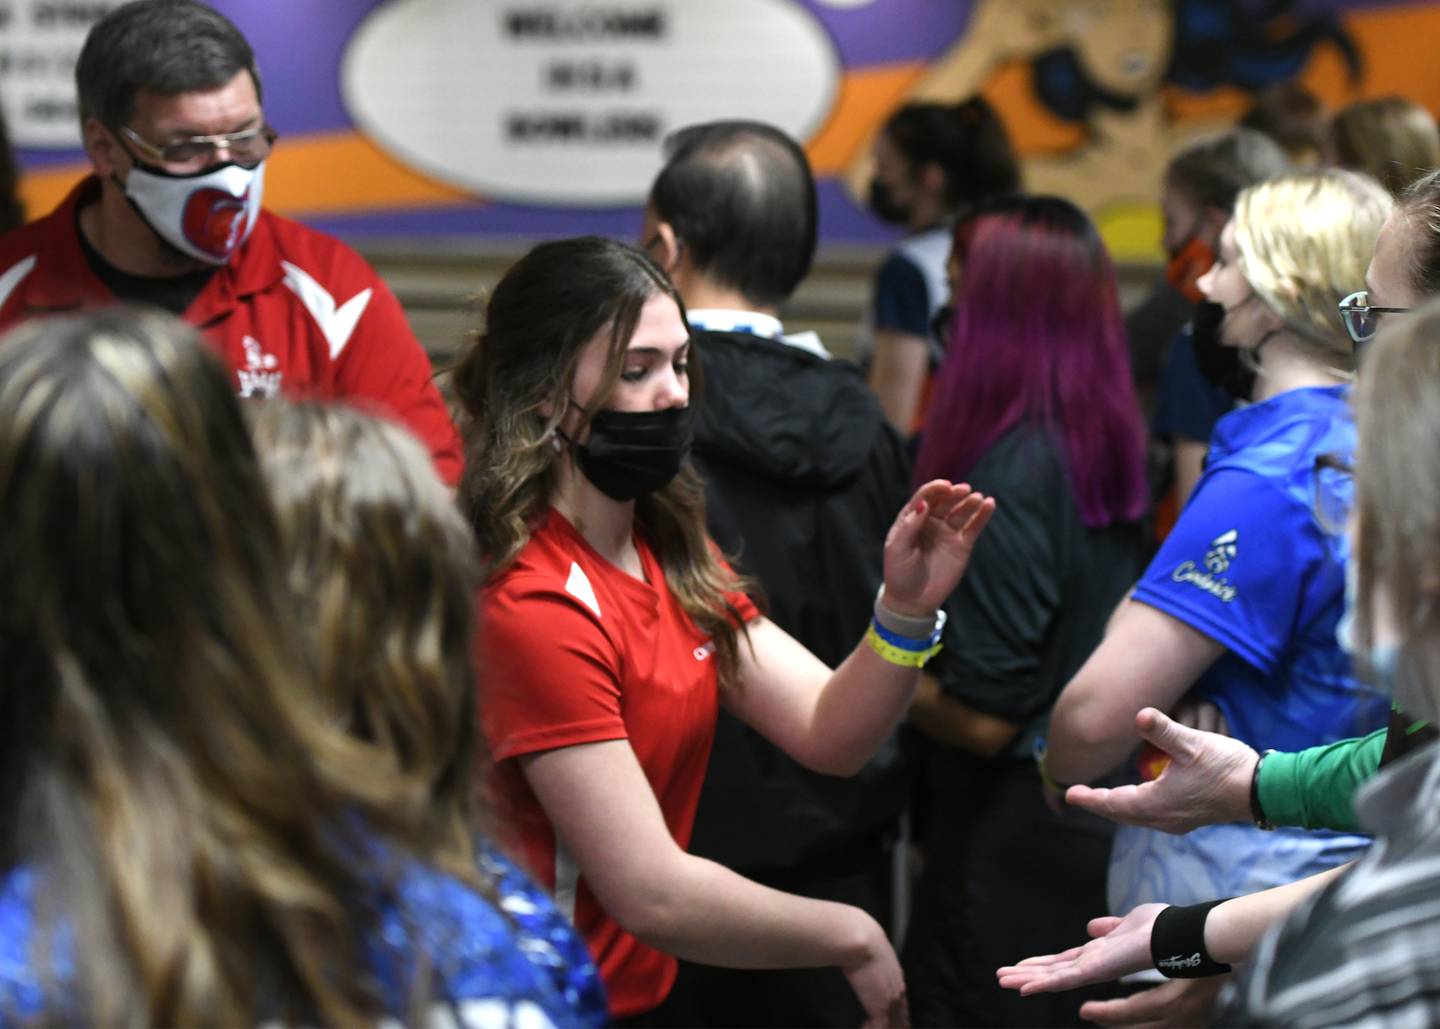 Oregon's Ava Wight is congratulated by another coach after throwing a strike while competing in the state bowling finals at the Cherry Bowl in Cherry Valley on Saturday. Pictured at left is Oregon coach Al Nordman.